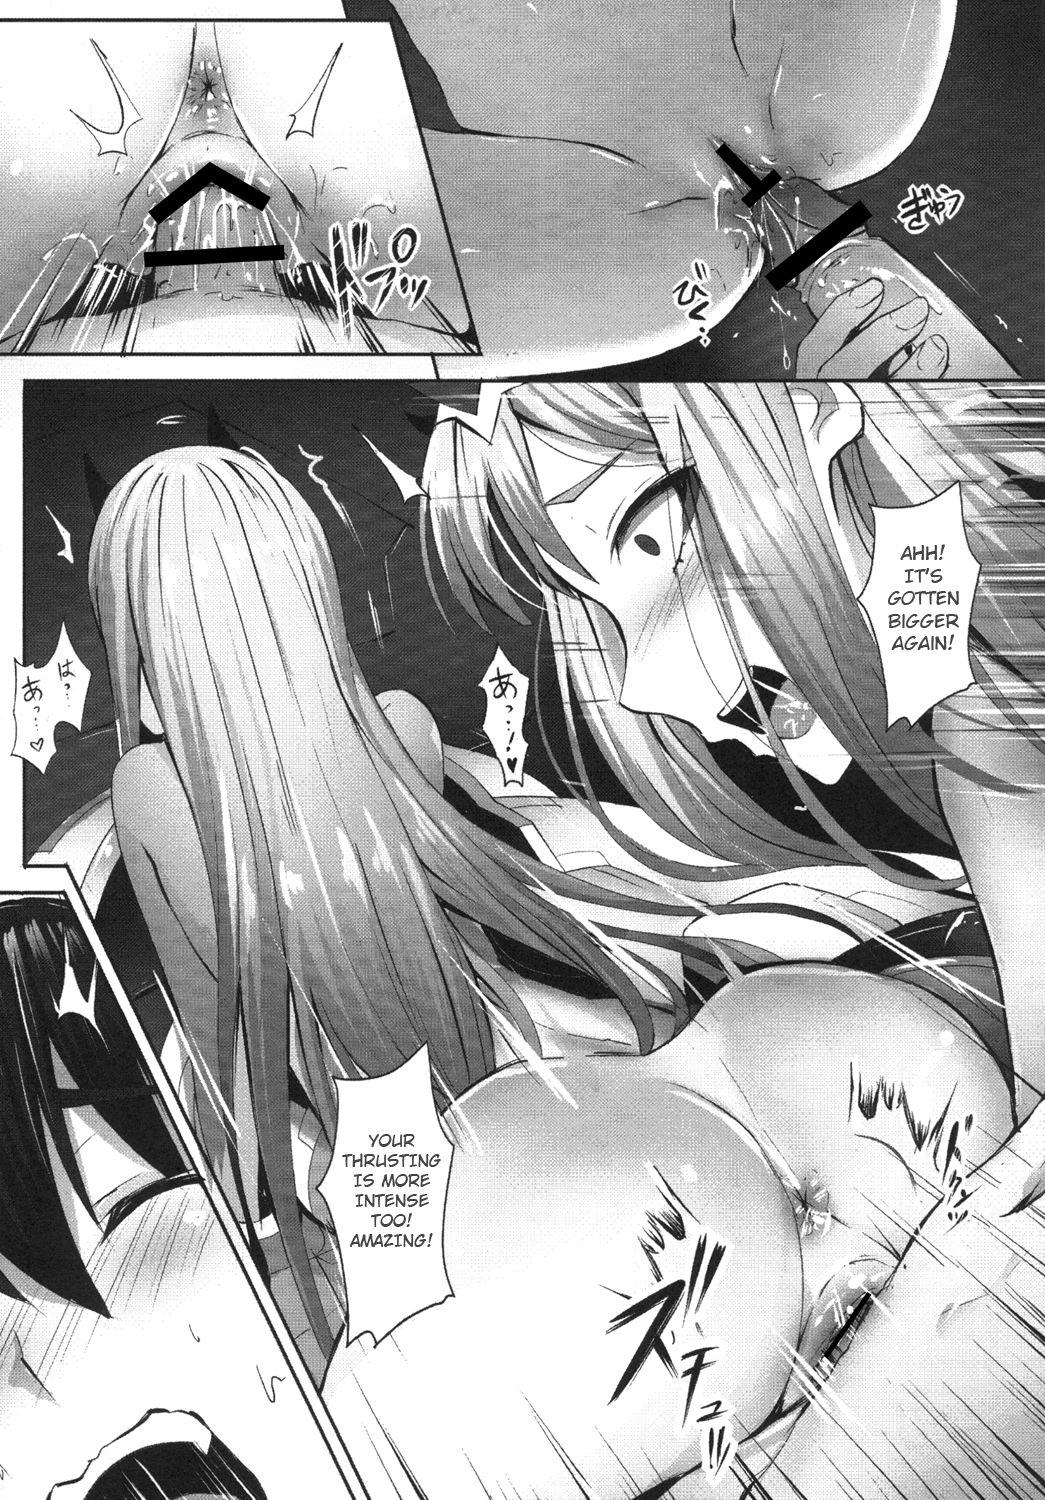 Freaky Darling need more Sexx - Darling in the franxx Twink - Page 6